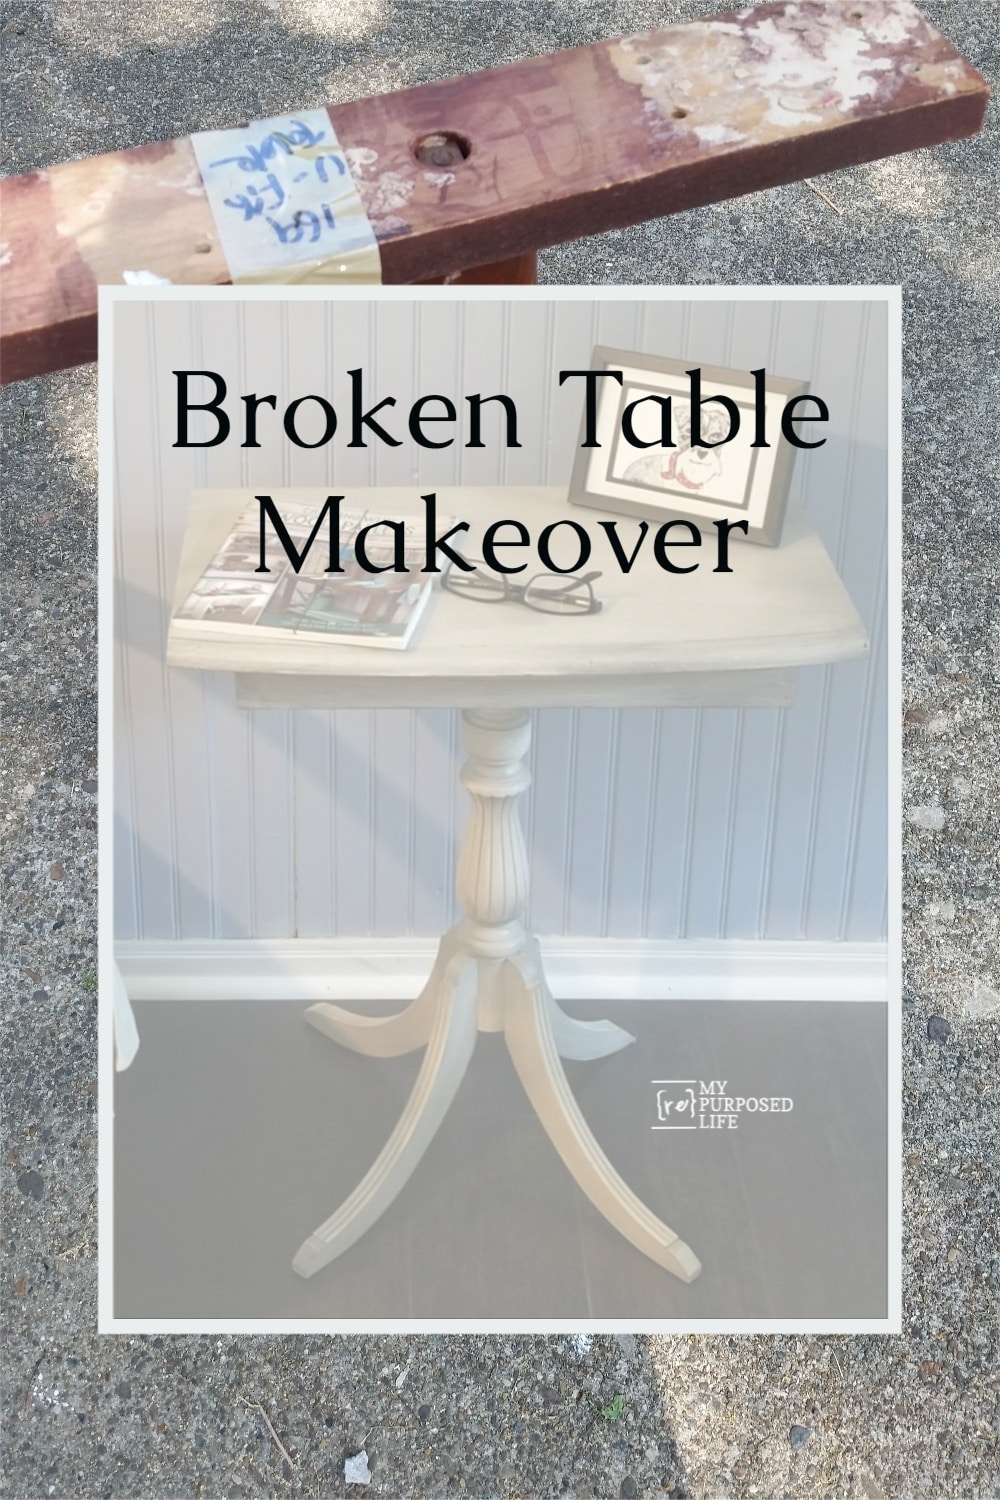 Using parts of two different table, I put a new top on the broken claw foot table. After a little paint and glaze it's ready for it's new home. A cute little four legged claw foot table perfect for any small space. #MyRepurposedLife #repurposed #upcycle #clawfoot #table #diy #makeover via @repurposedlife